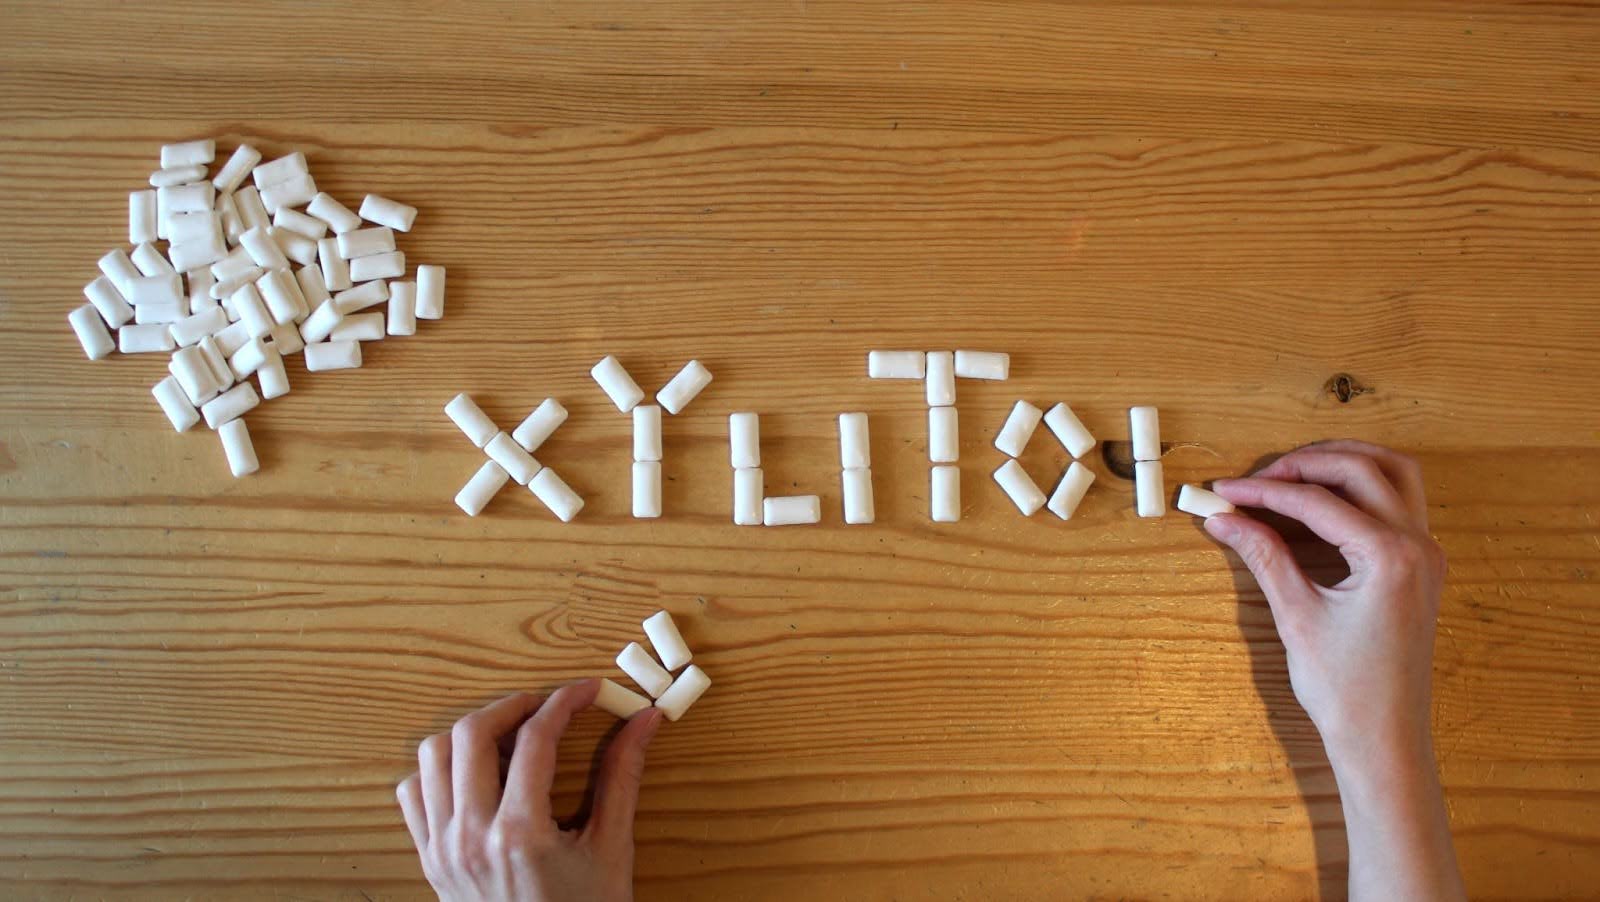 Xylitol chewing gum - the best chewing gum for kids’ teeth